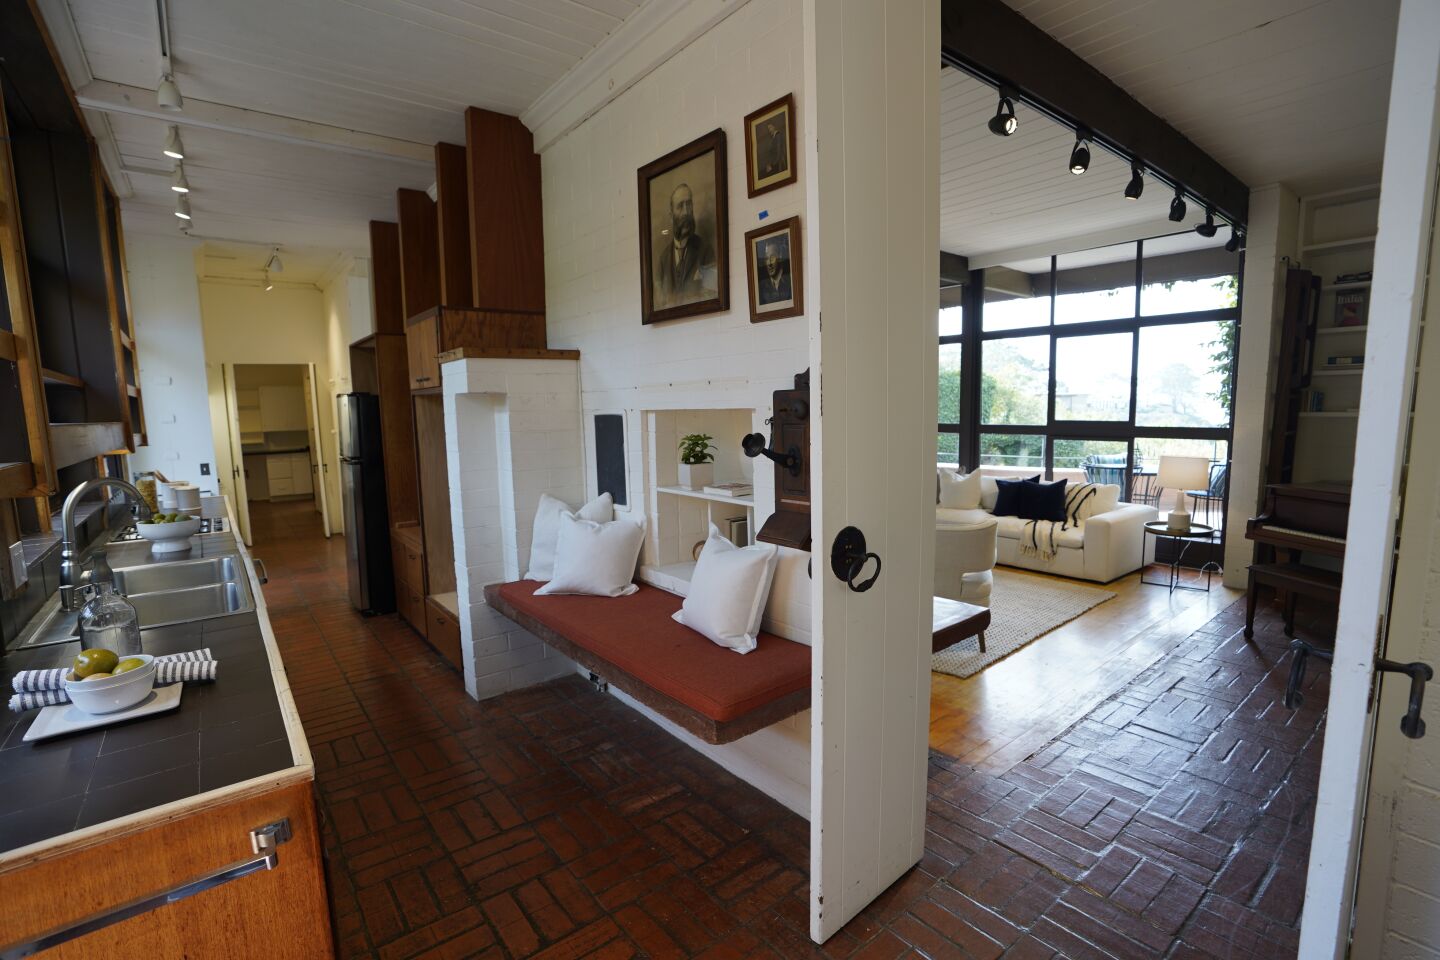 San Diego, California - December 02: The historic home of oceanographer Walter Munk. The kitchen area looking towards the living room at La Jolla Shores on Thursday, Dec. 2, 2021 in San Diego, California. (Alejandro Tamayo / The San Diego Union-Tribune)